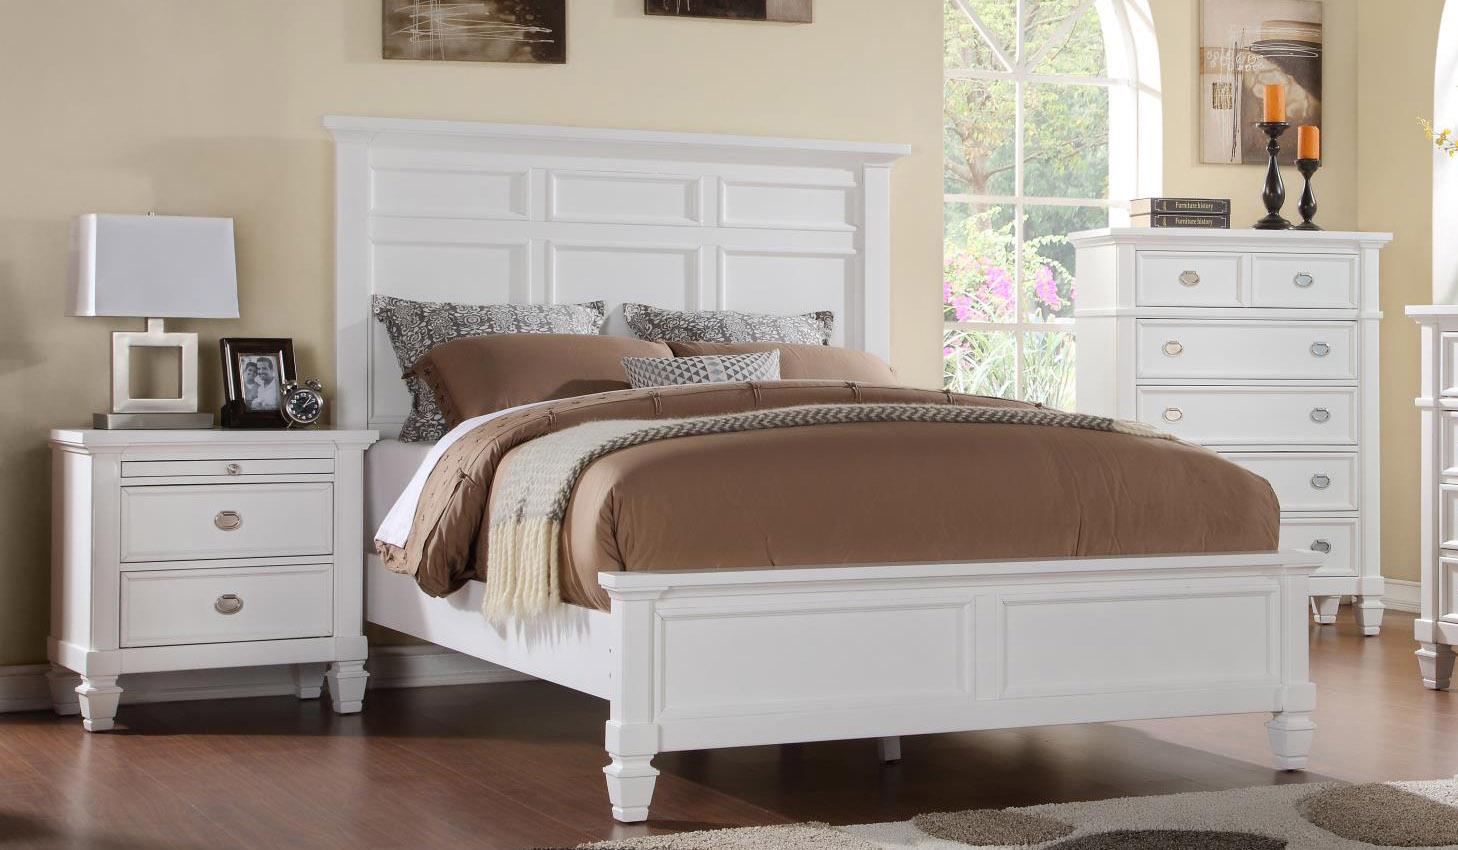 

    
MYCO Furniture DL110Q Dolce White Finish Solid Hardwoods Queen Bed Set 3Pcs Classic
